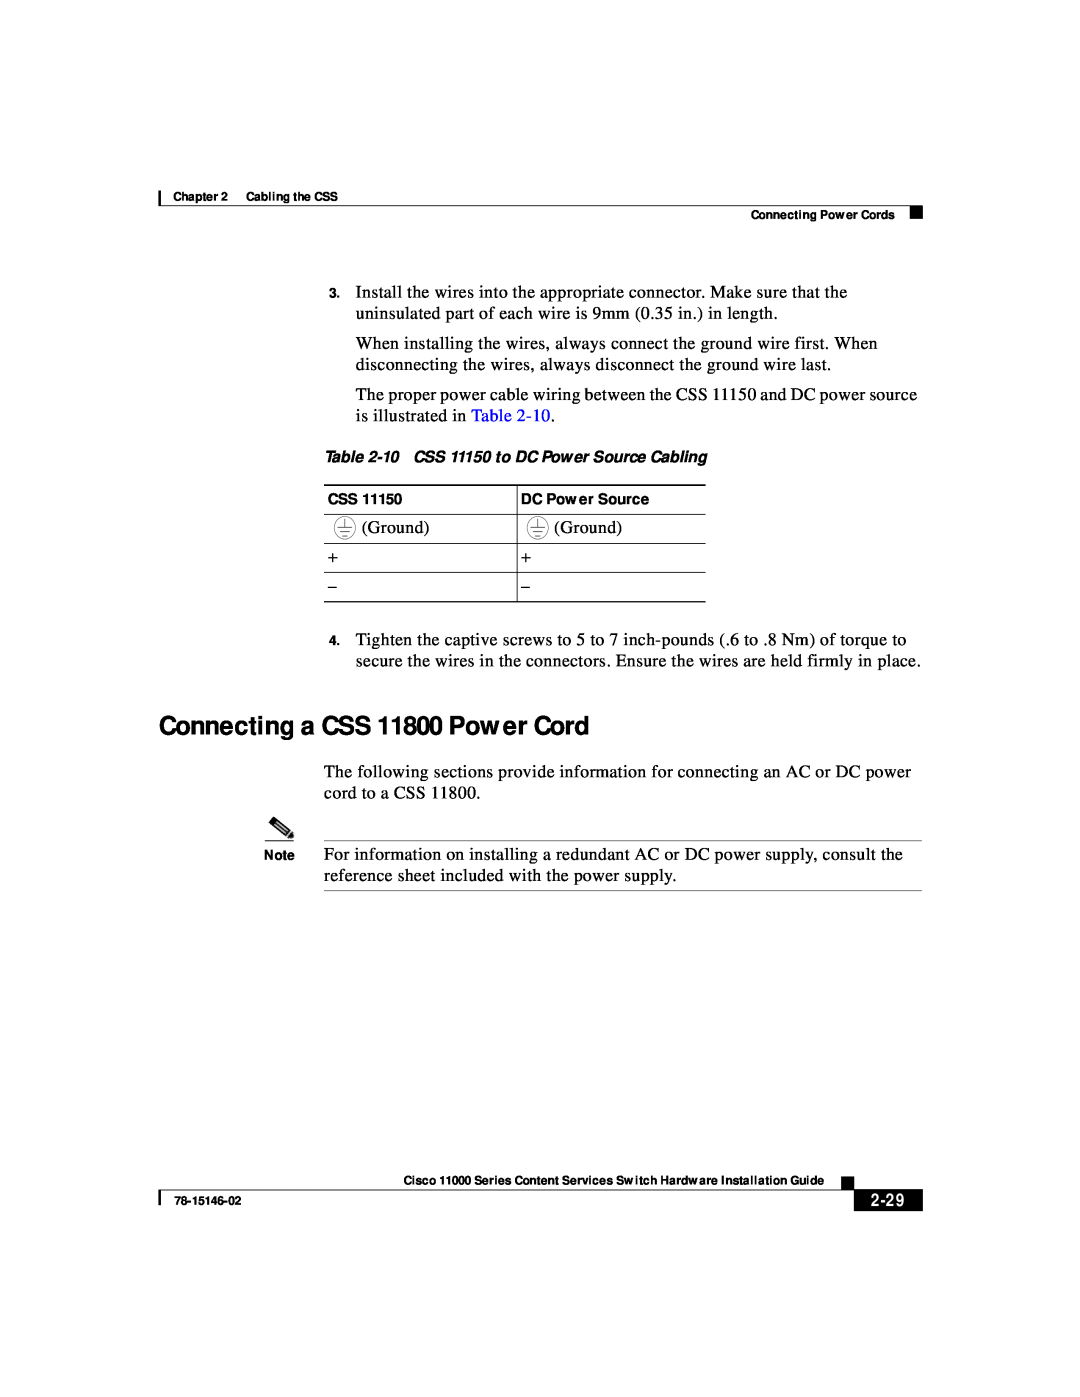 Cisco Systems 11000 Series manual Connecting a CSS 11800 Power Cord, DC Power Source, 2-29 